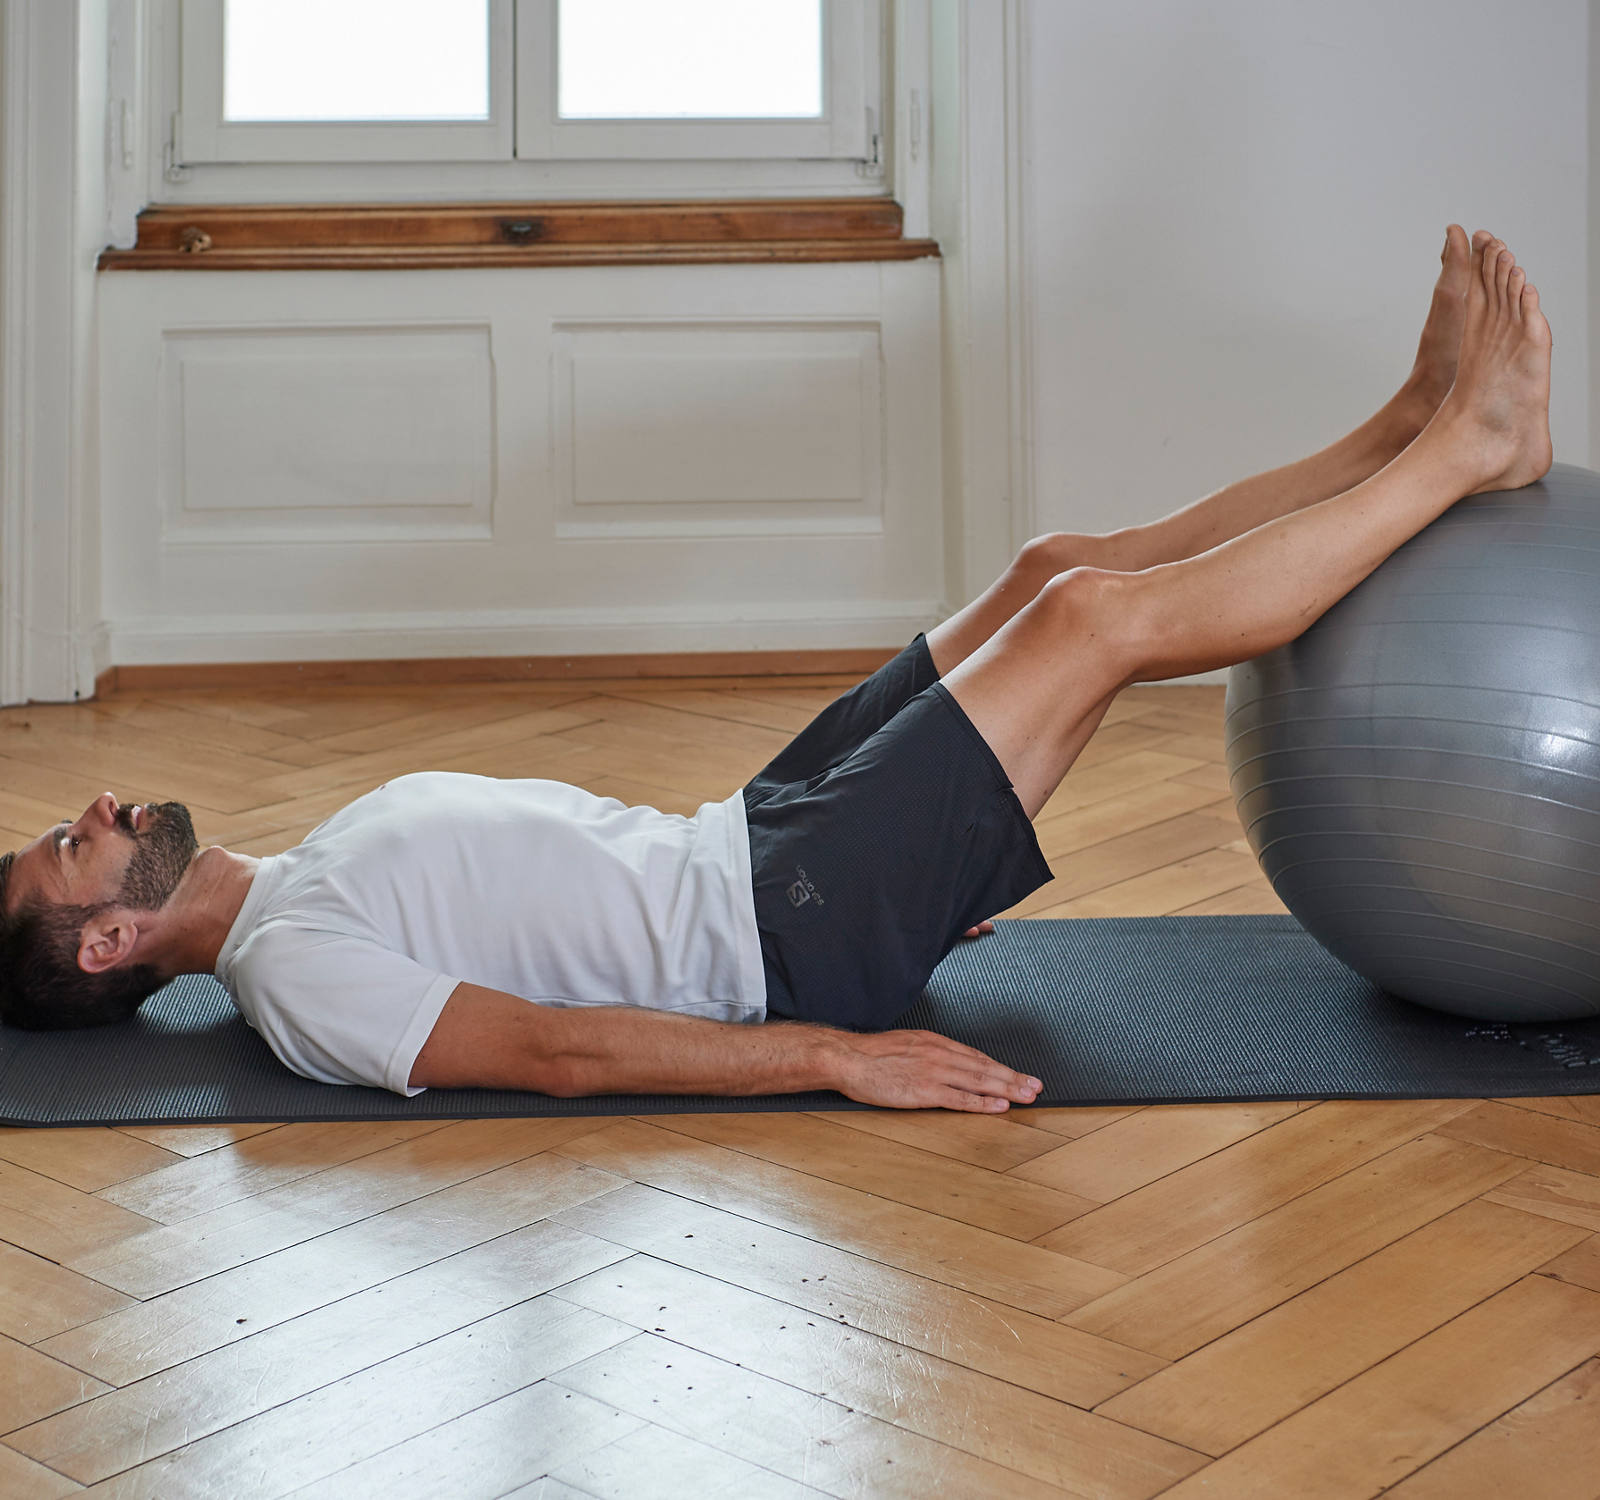 Using An Exercise Ball to Rehab Your Back